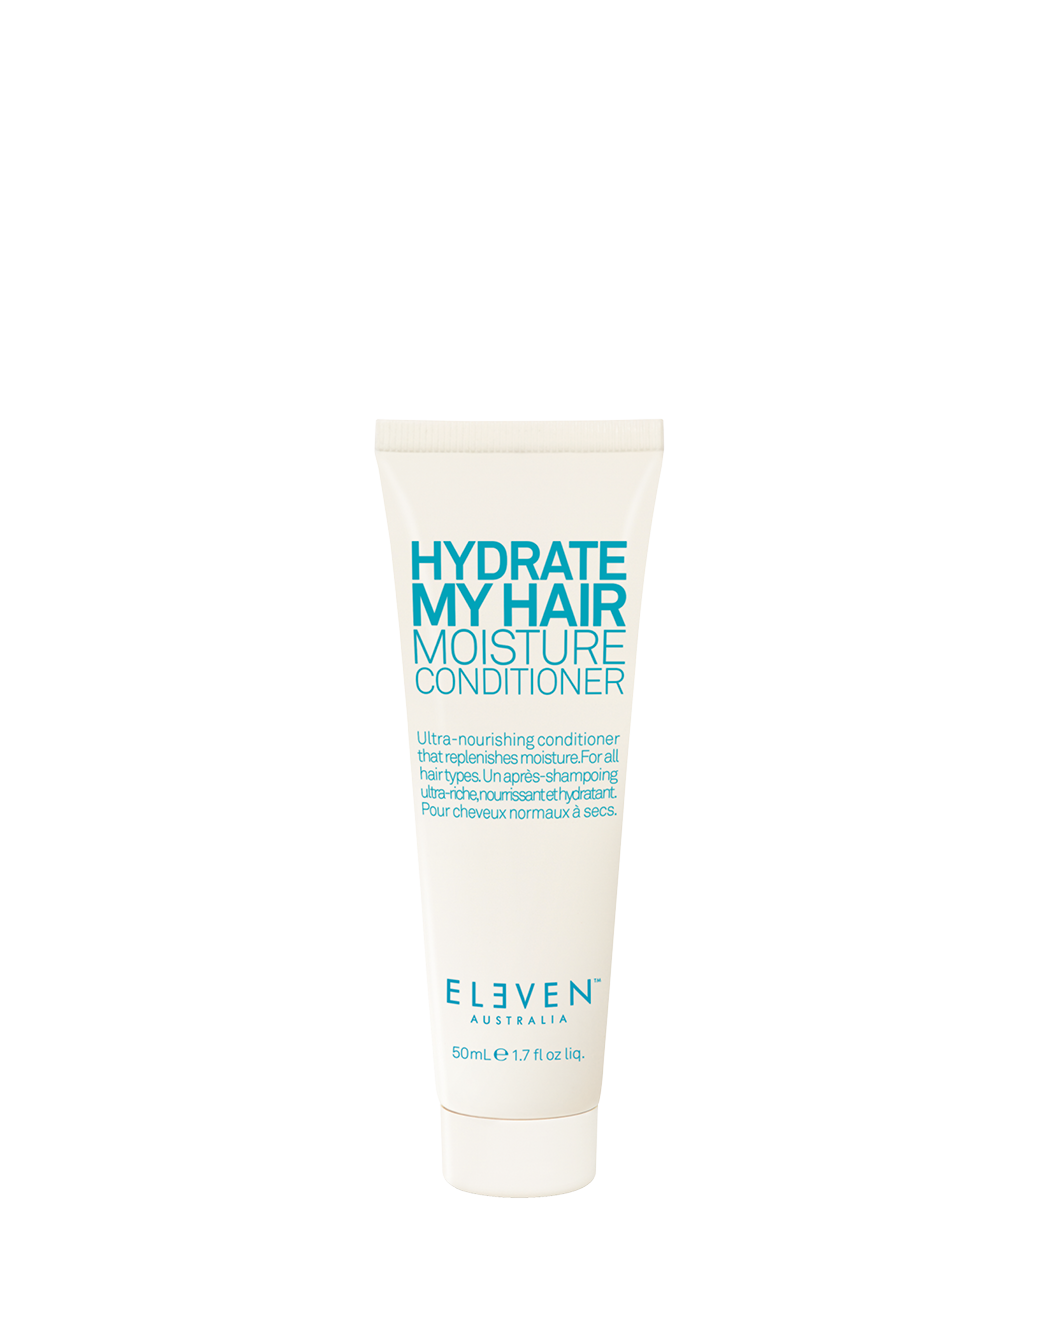 Hydrate My Hair Moisture Conditioner Travel Size 50ml